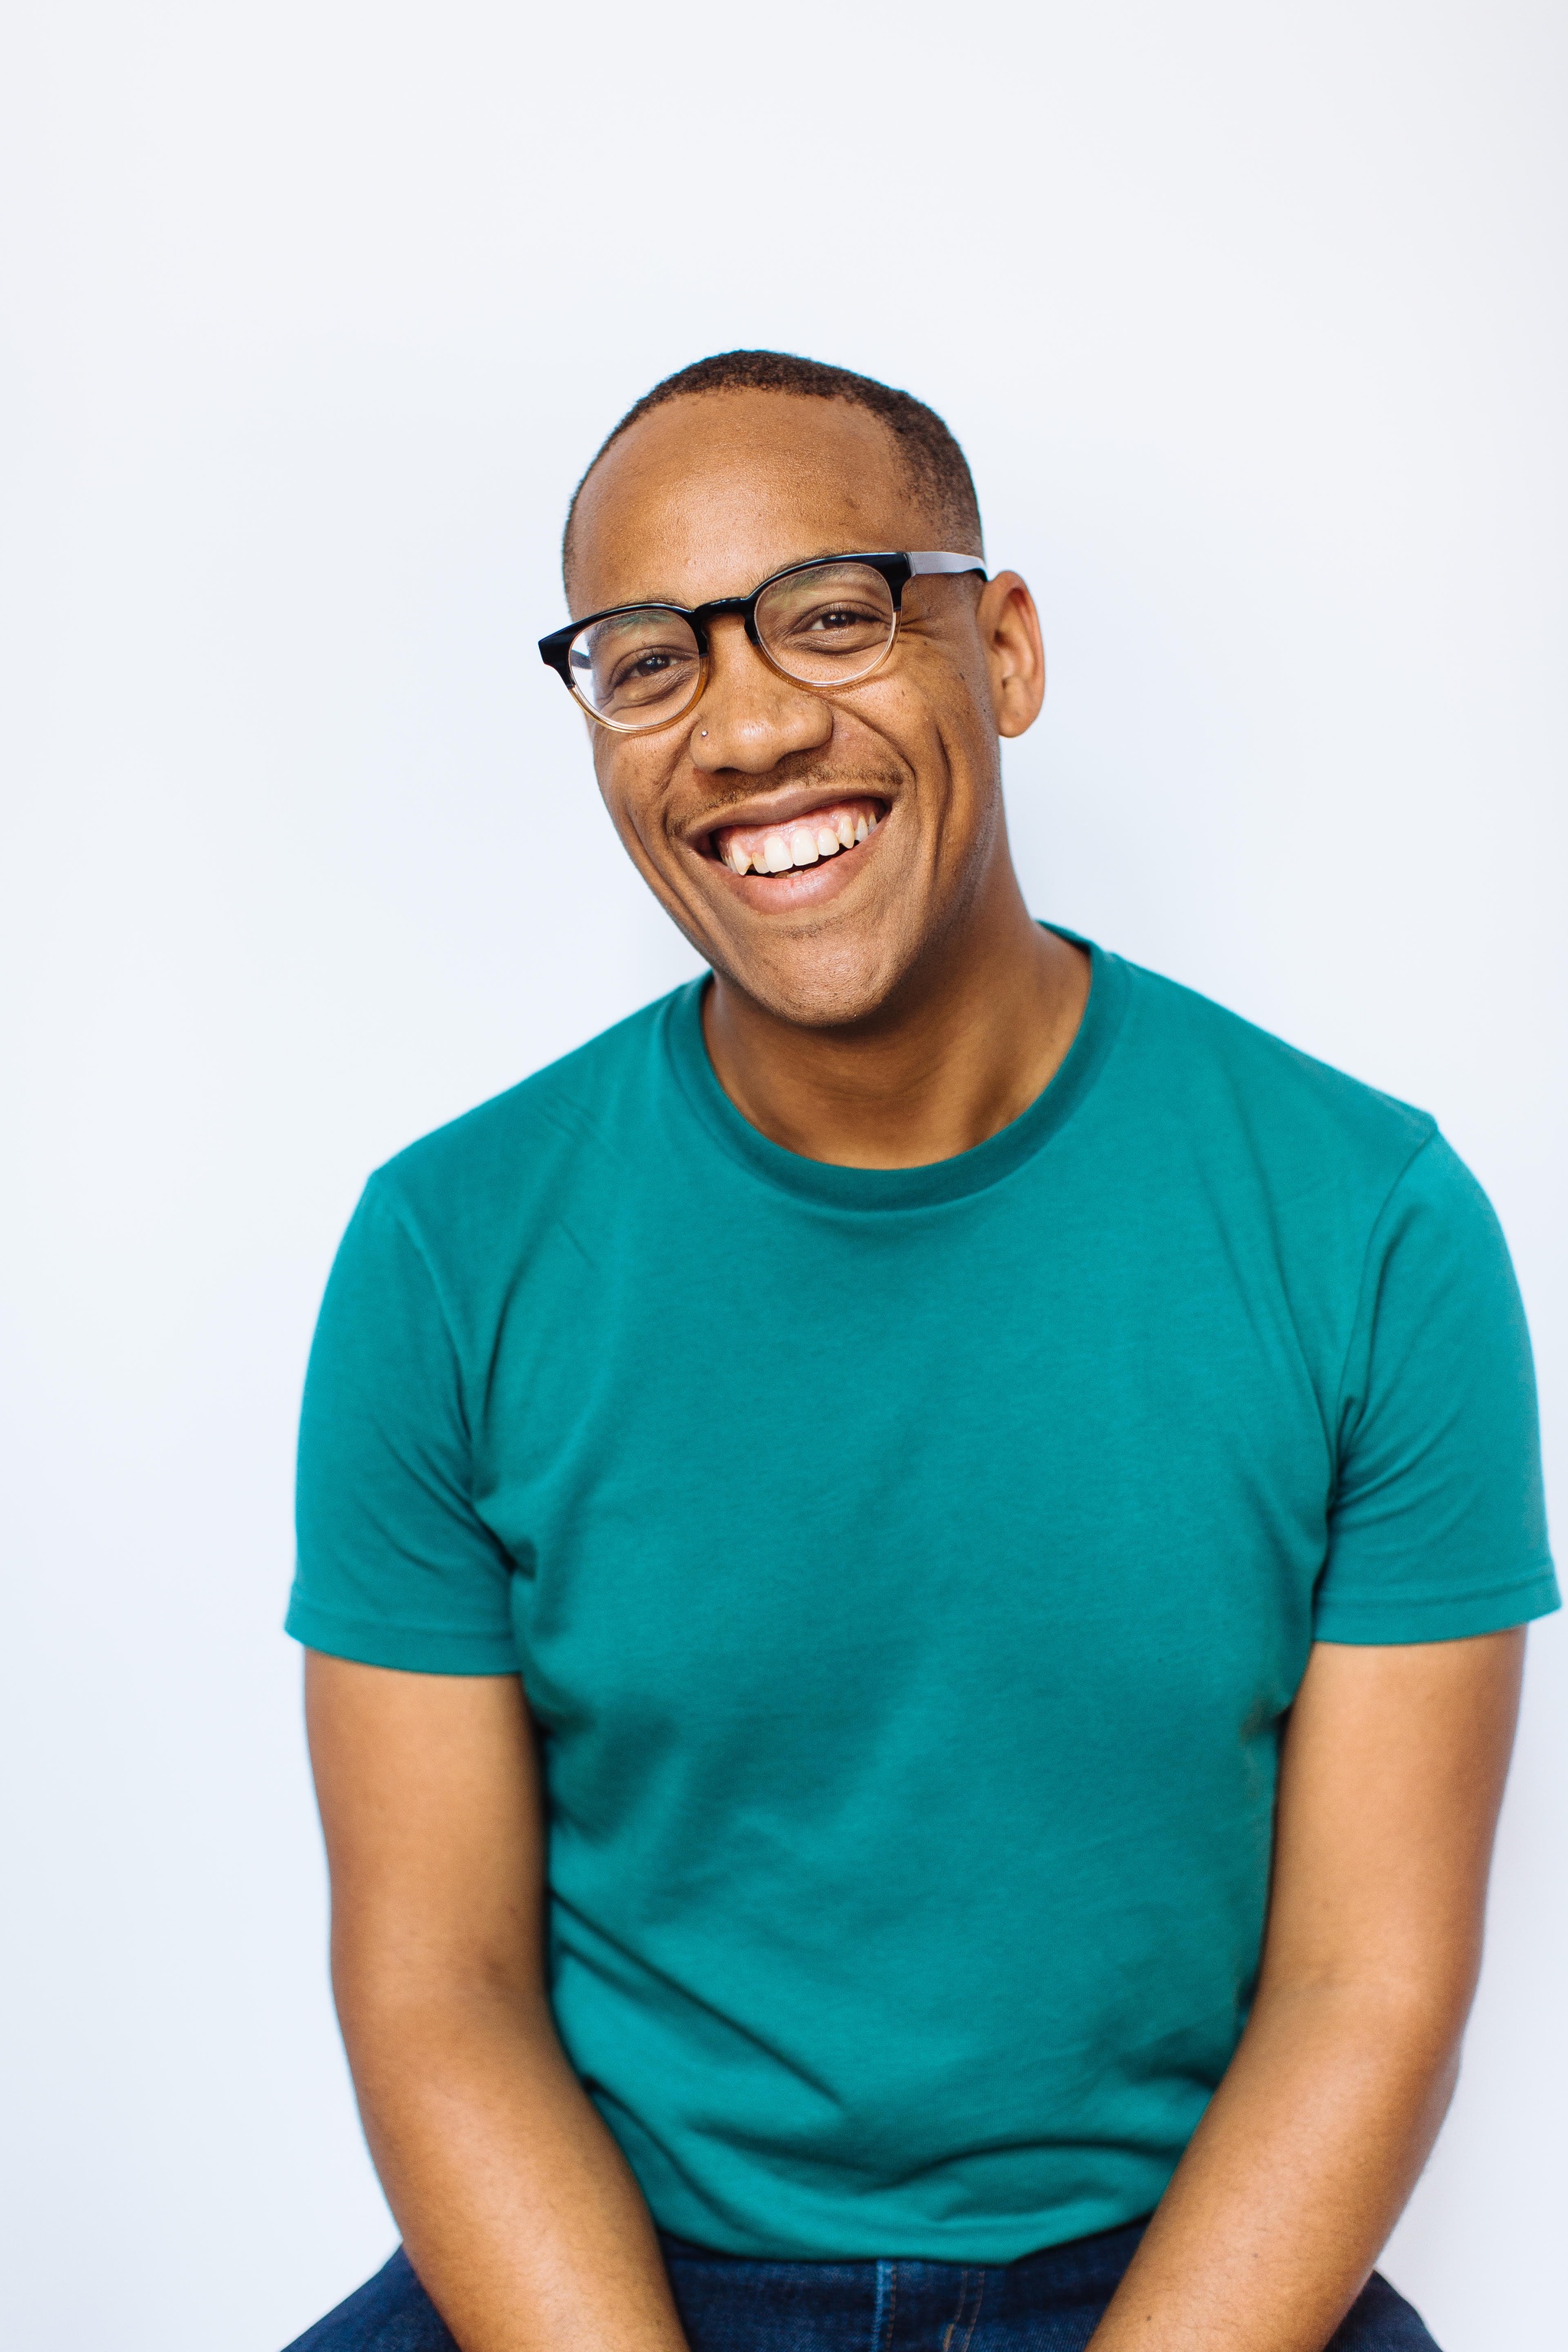 Artist Troy Anthony sits against a white background with hands in his lap, smiling broadly. Troy is a Black person with a shaved head who wears glasses and a teal t-shirt in this photo.